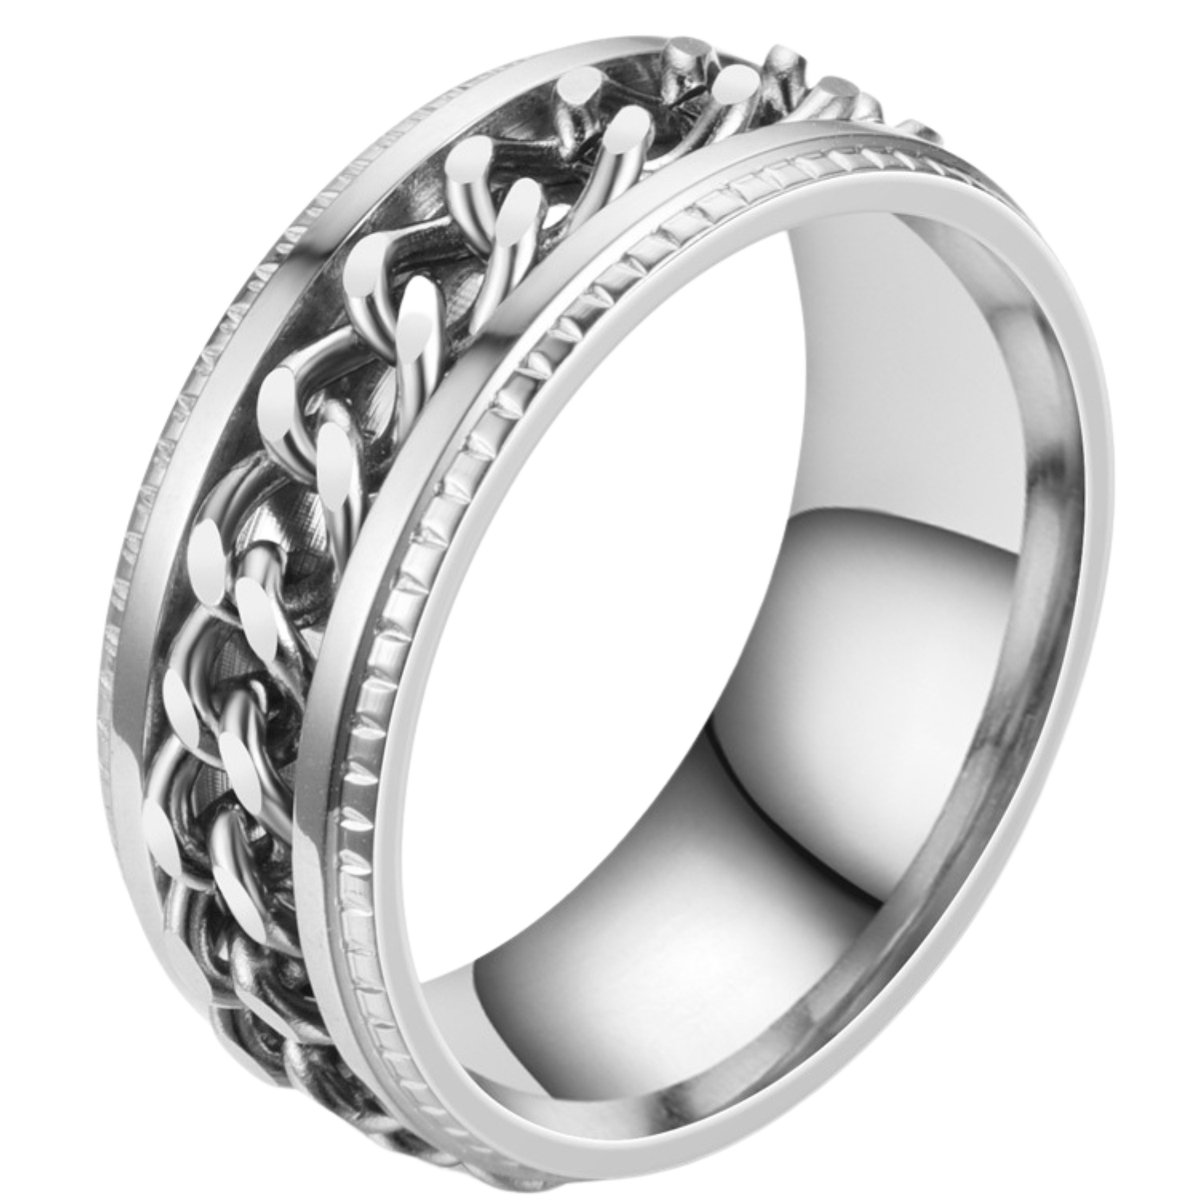 Anxiety Ring - (Ketting) - Stress Ring - Fidget Ring - Anxiety Ring For Finger - Draaibare Ring - Spinning Ring - Zilver-Zilver - (17.50mm / maat 55)